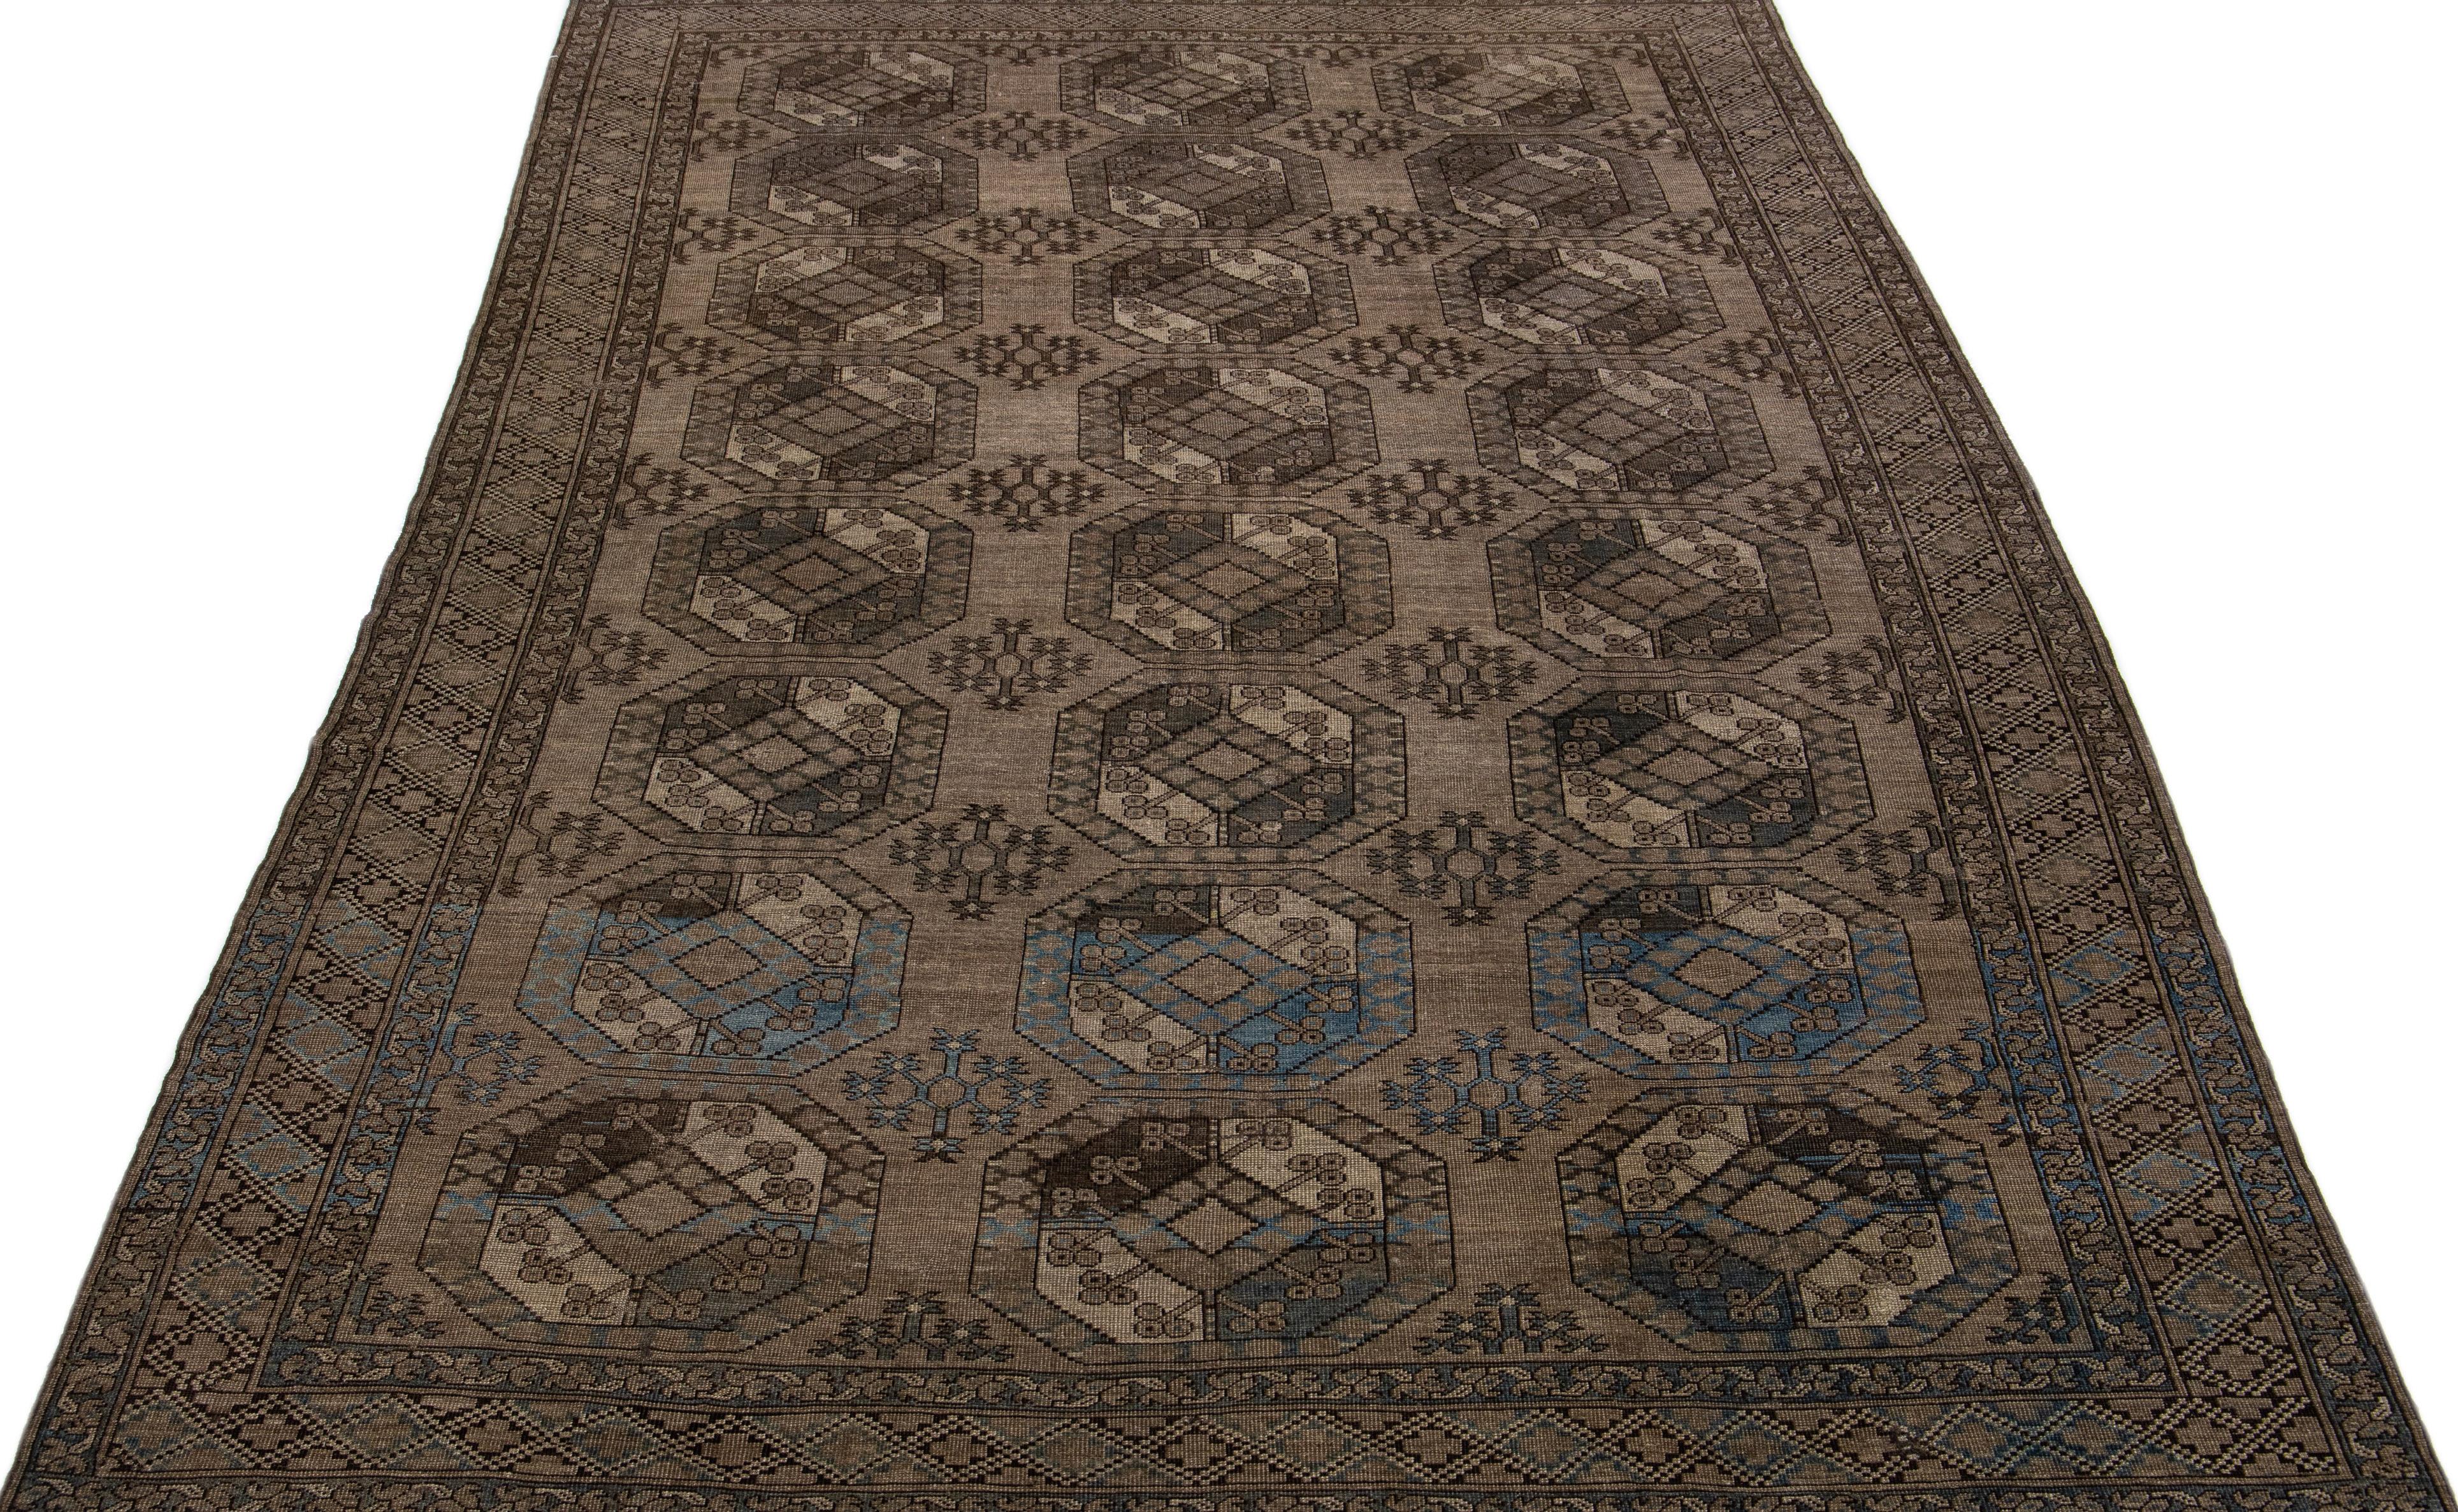 Beautiful antique Turkmen hand-knotted wool rug with a brown color field in a gorgeous all-over Gul pattern design.

This rug measures: 7'5